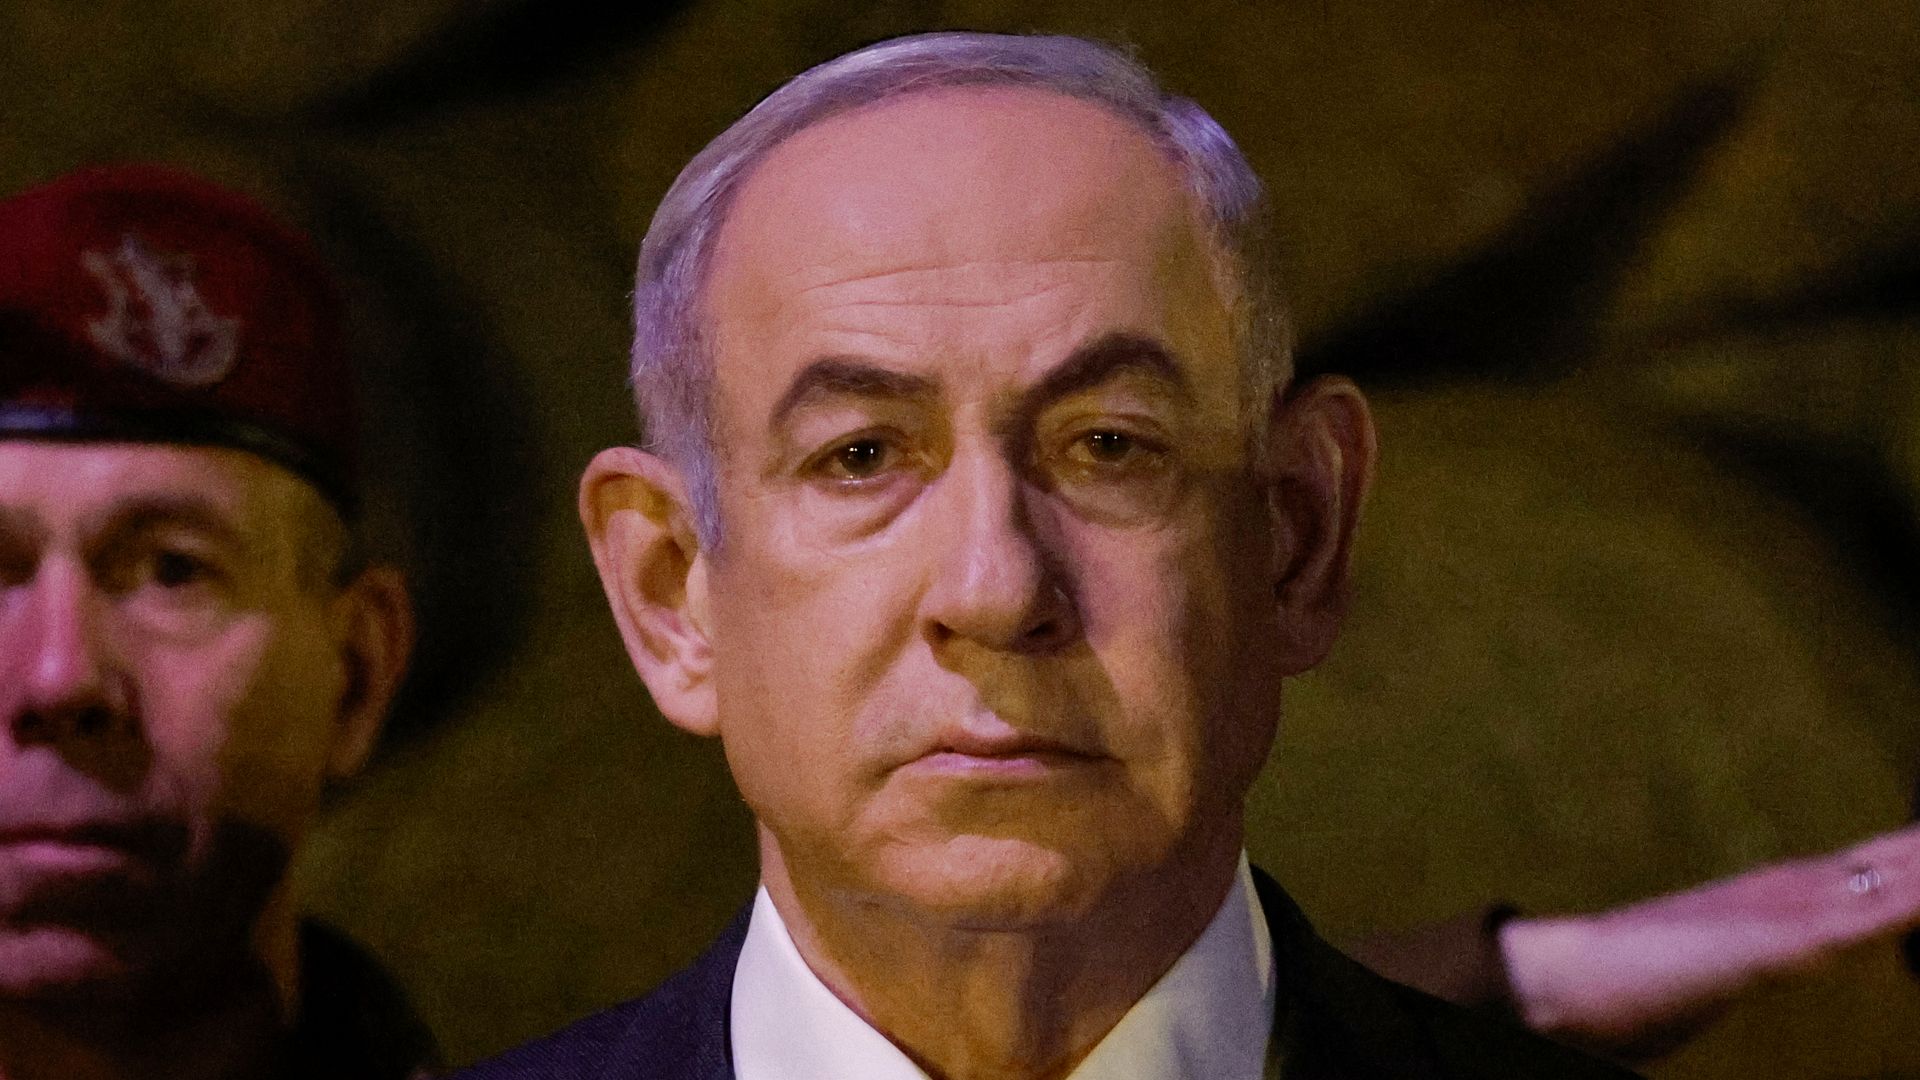 In recent interview President Joe Biden suggested that Israeli Prime Minister Benjamin Netanyahu may be prolonging the war in Gaza for political reasons.